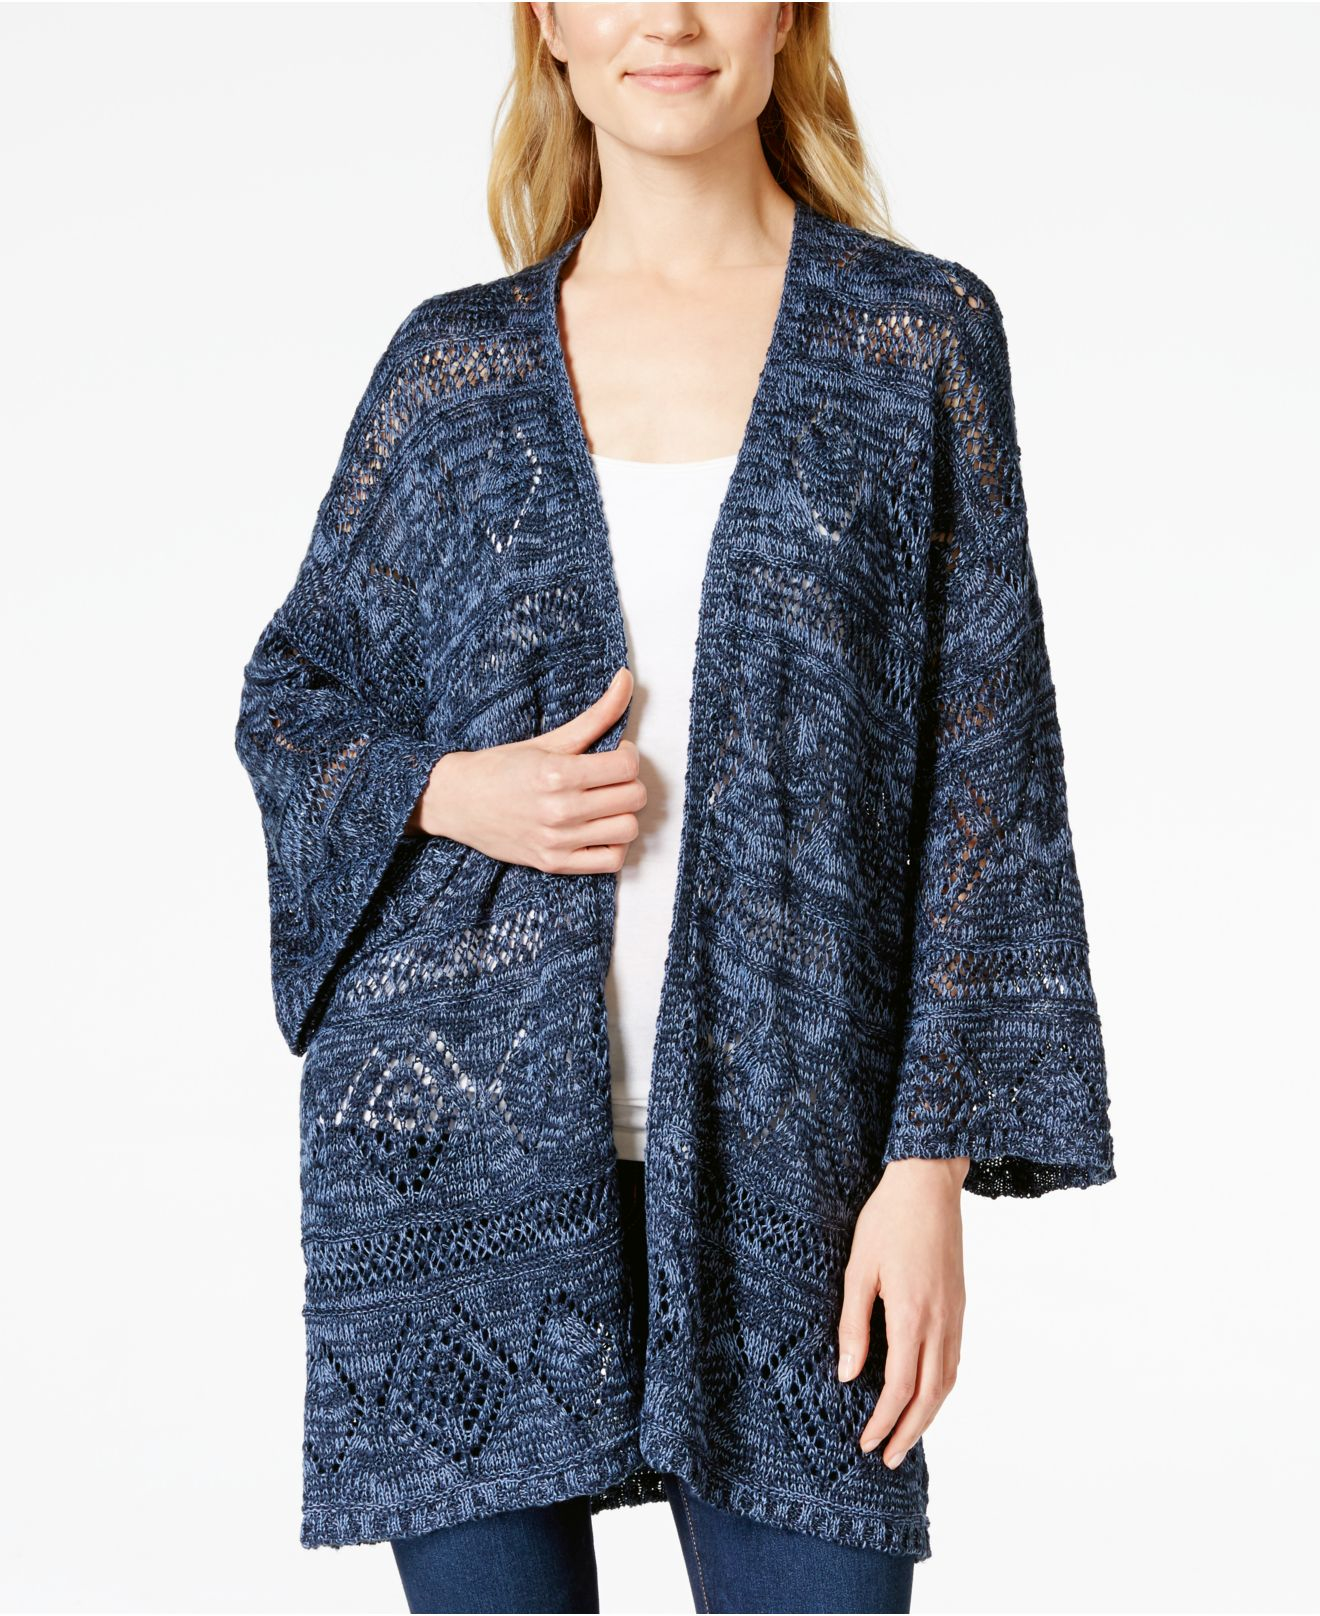 Lyst - Style & Co. Kimono Sleeve Knit Cardigan, Only At Macy's in Blue